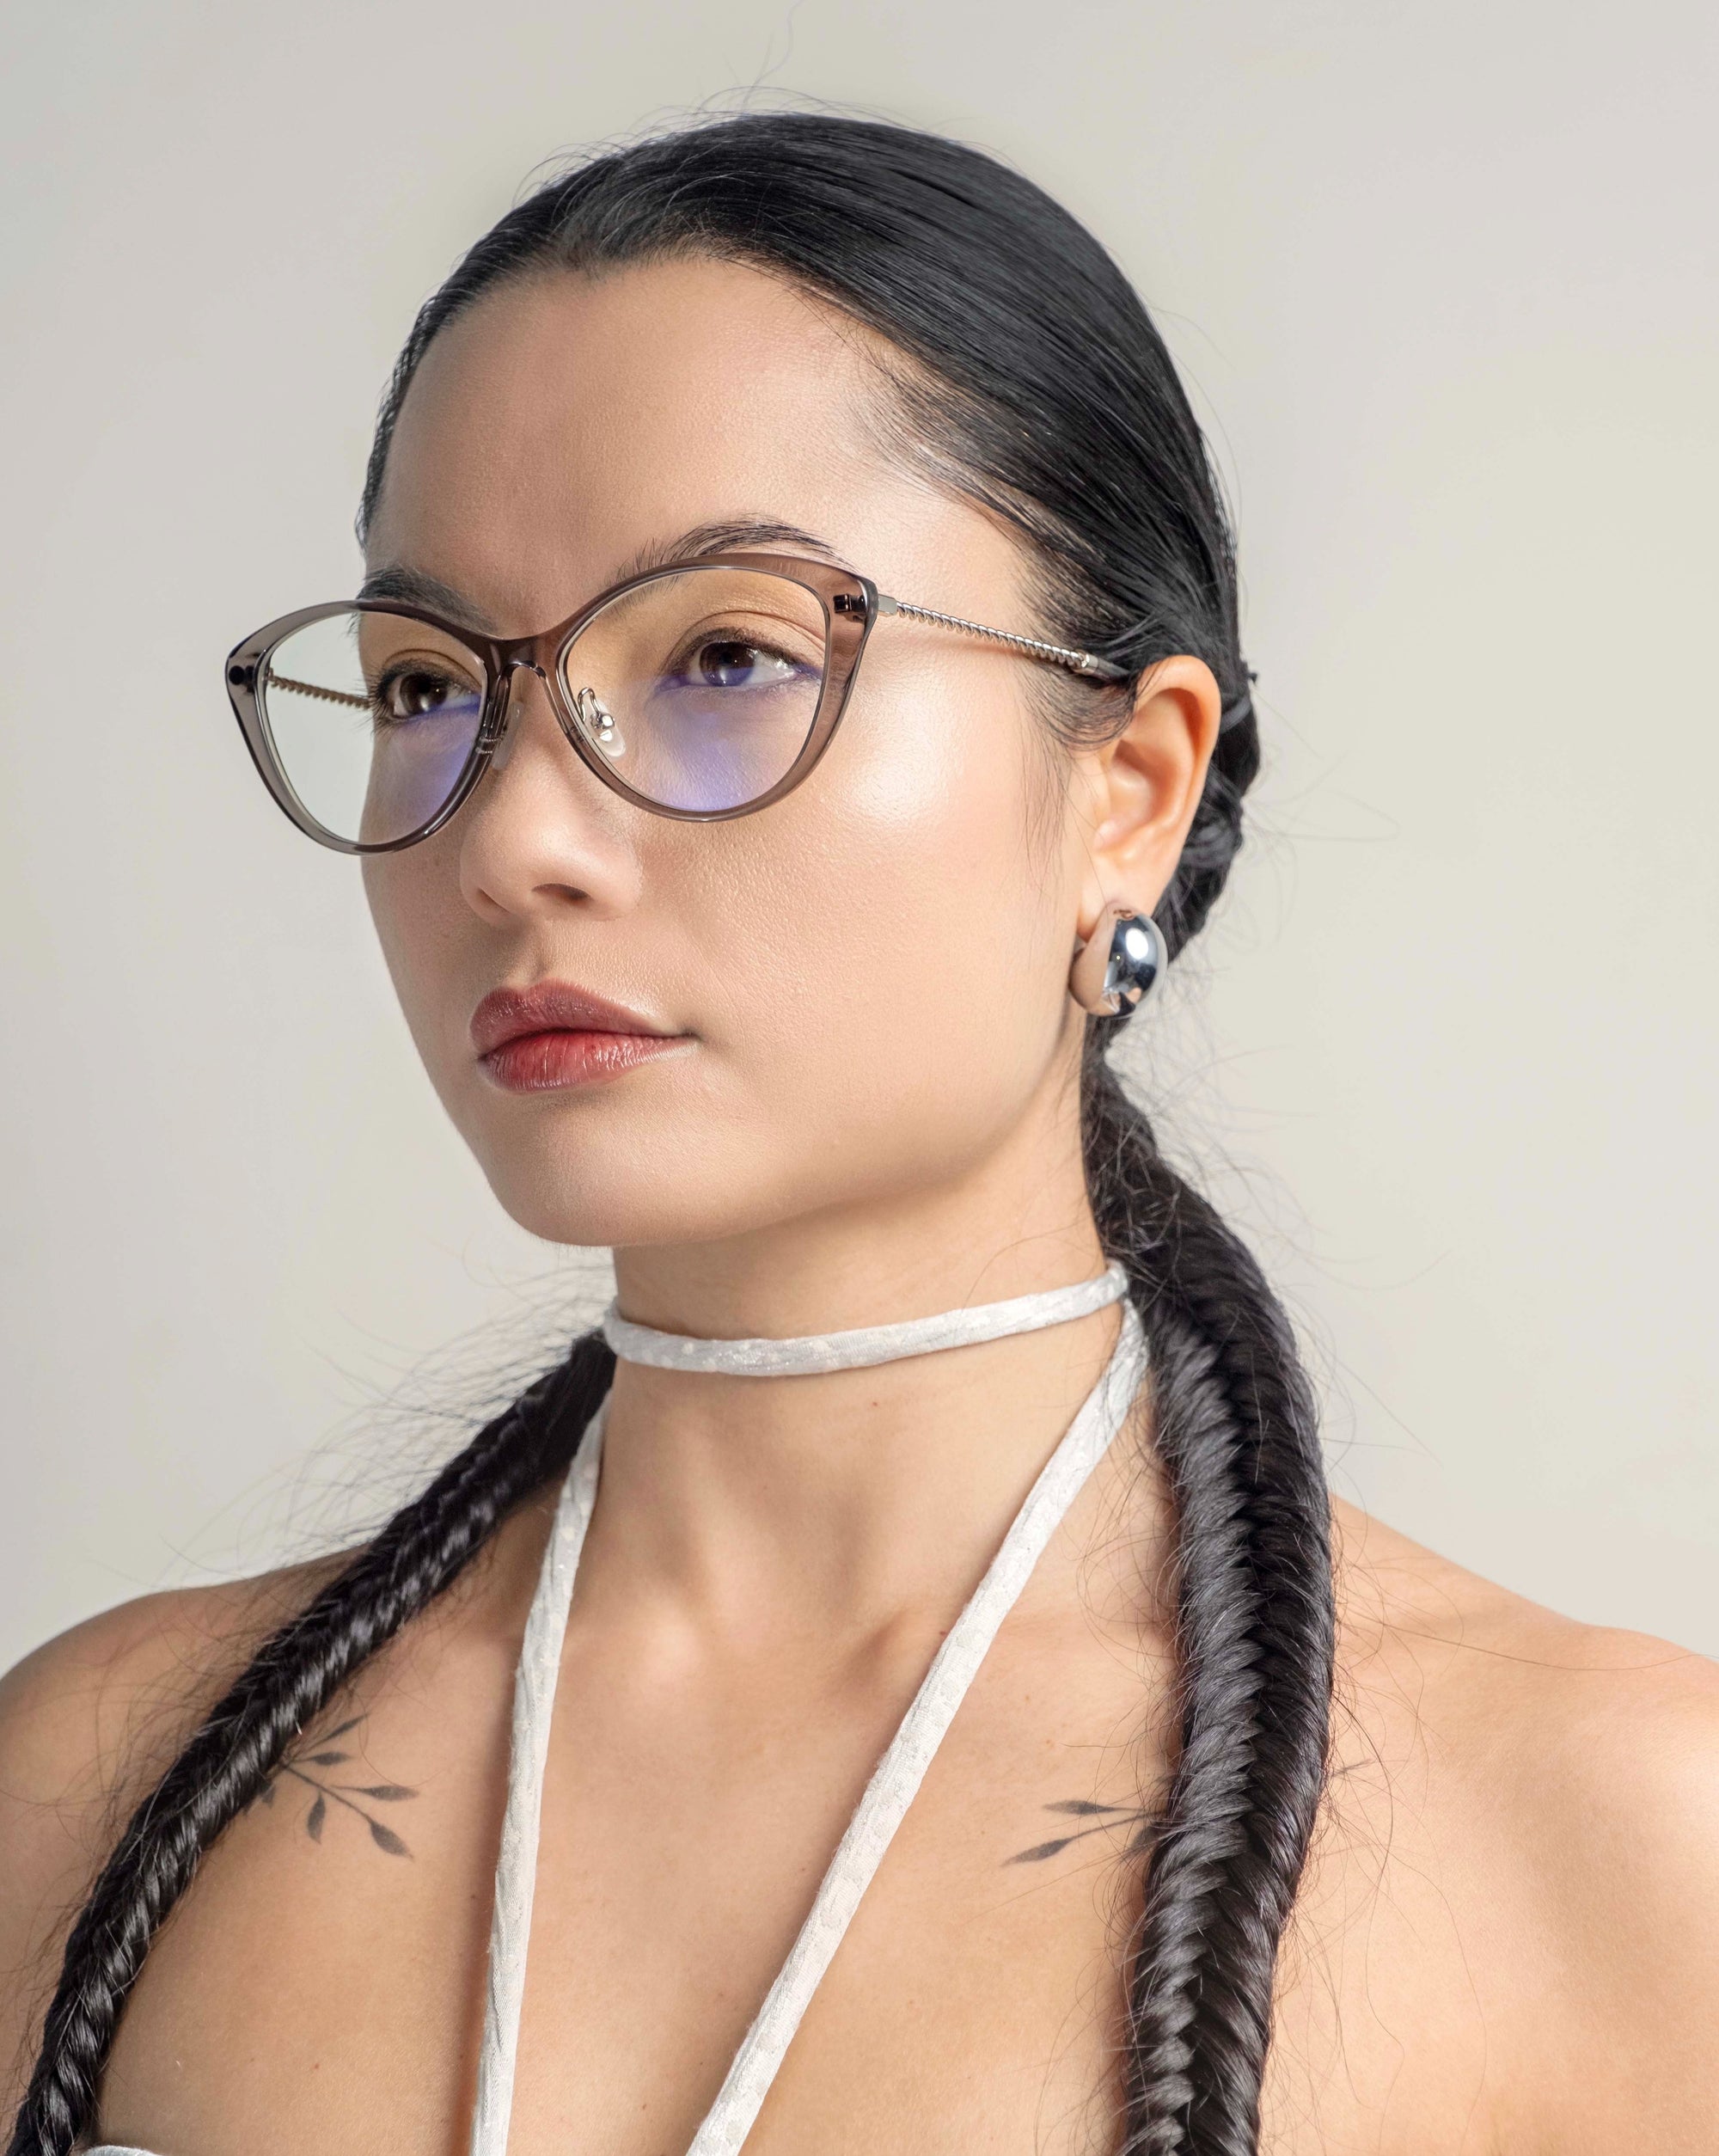 A person with long dark hair styled in two braided pigtails and wearing For Art&#39;s Sake® Perla II glasses with a thin frame featuring jade-stone nose pads. The individual has a neutral expression and wears a choker-style necklace and earrings, with small tattoos visible on their shoulders. The background is plain.